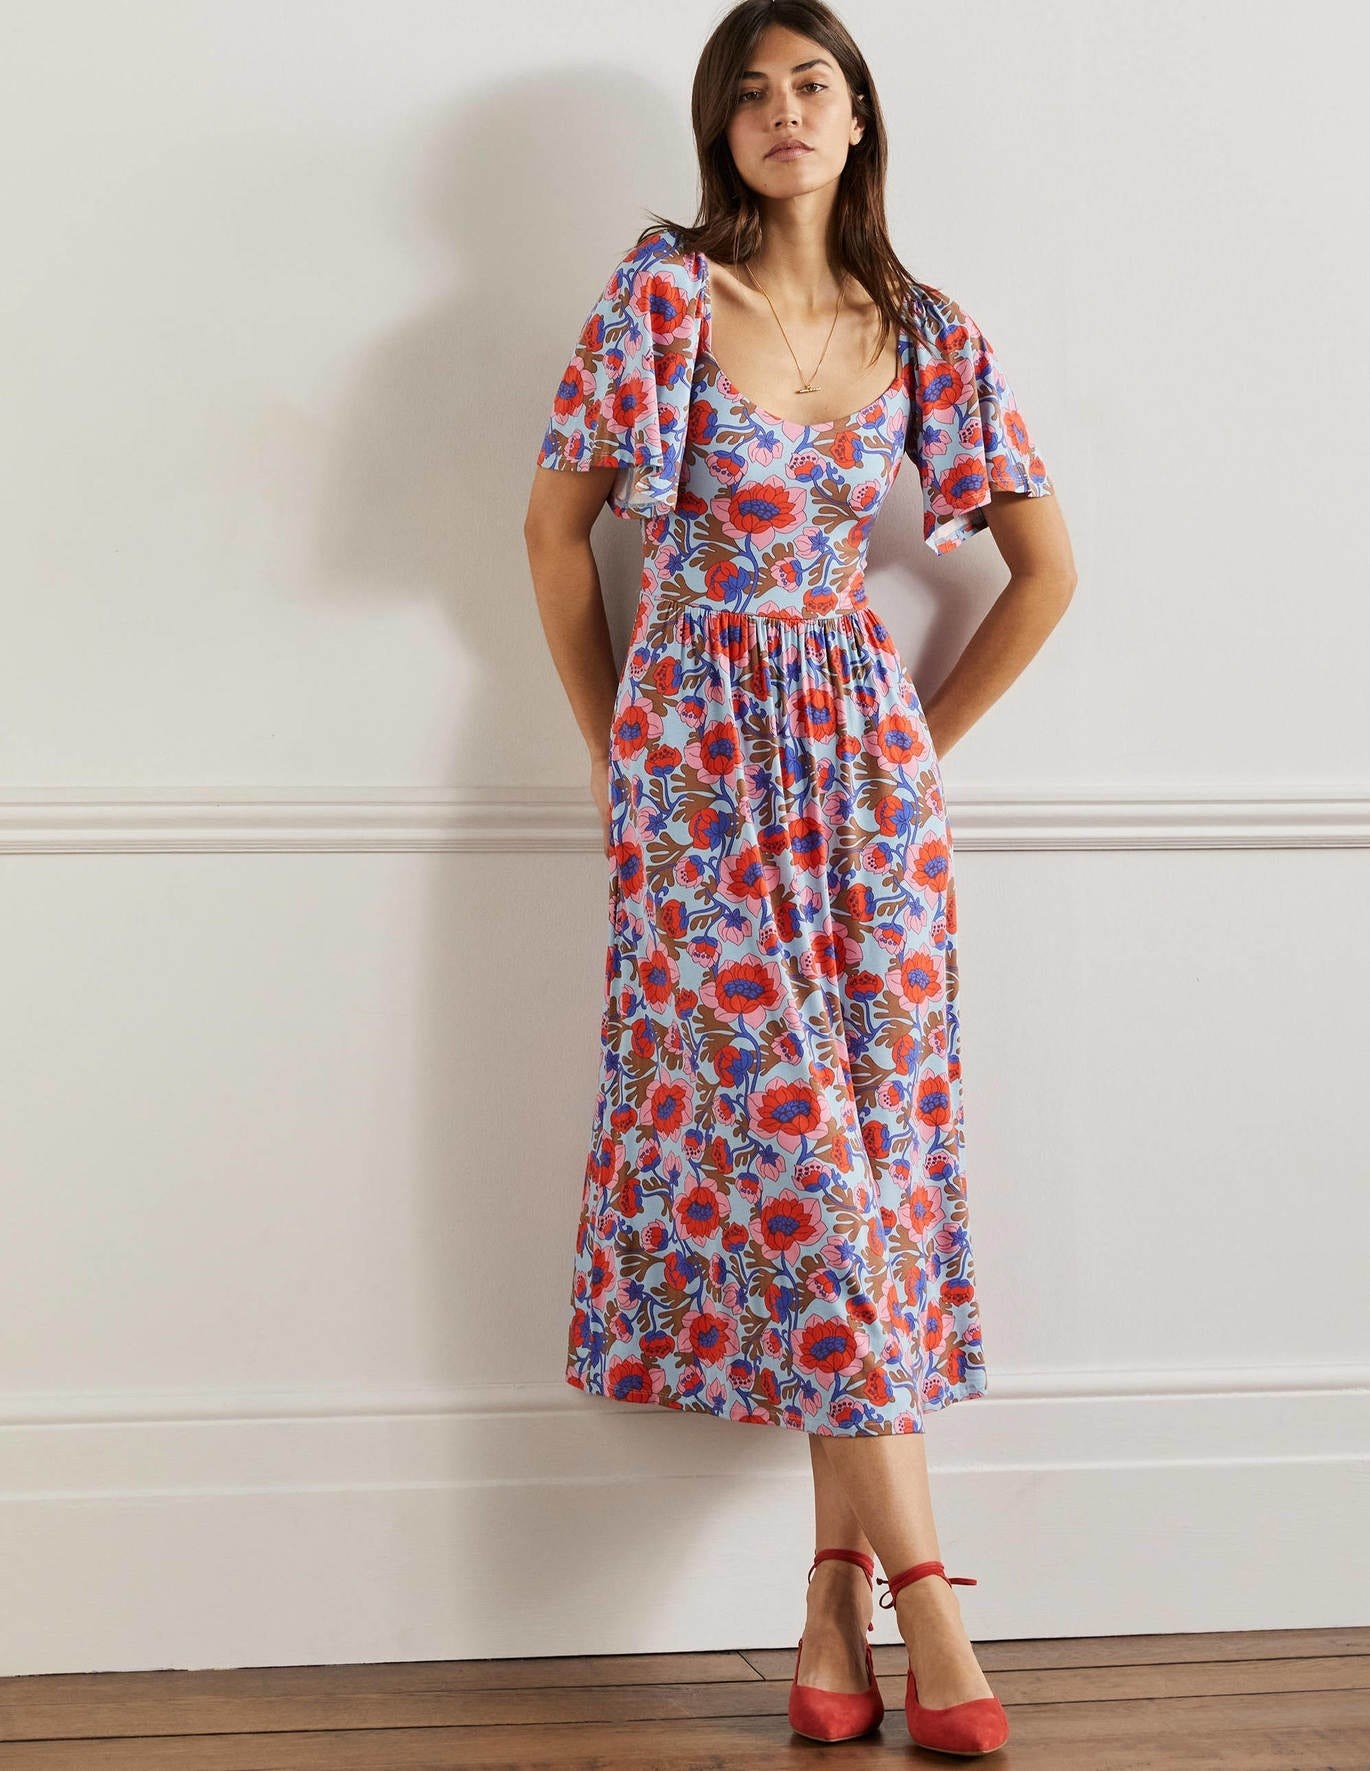 21 Stylish Things From Boden With Reviews That'll Have You Clicking ...